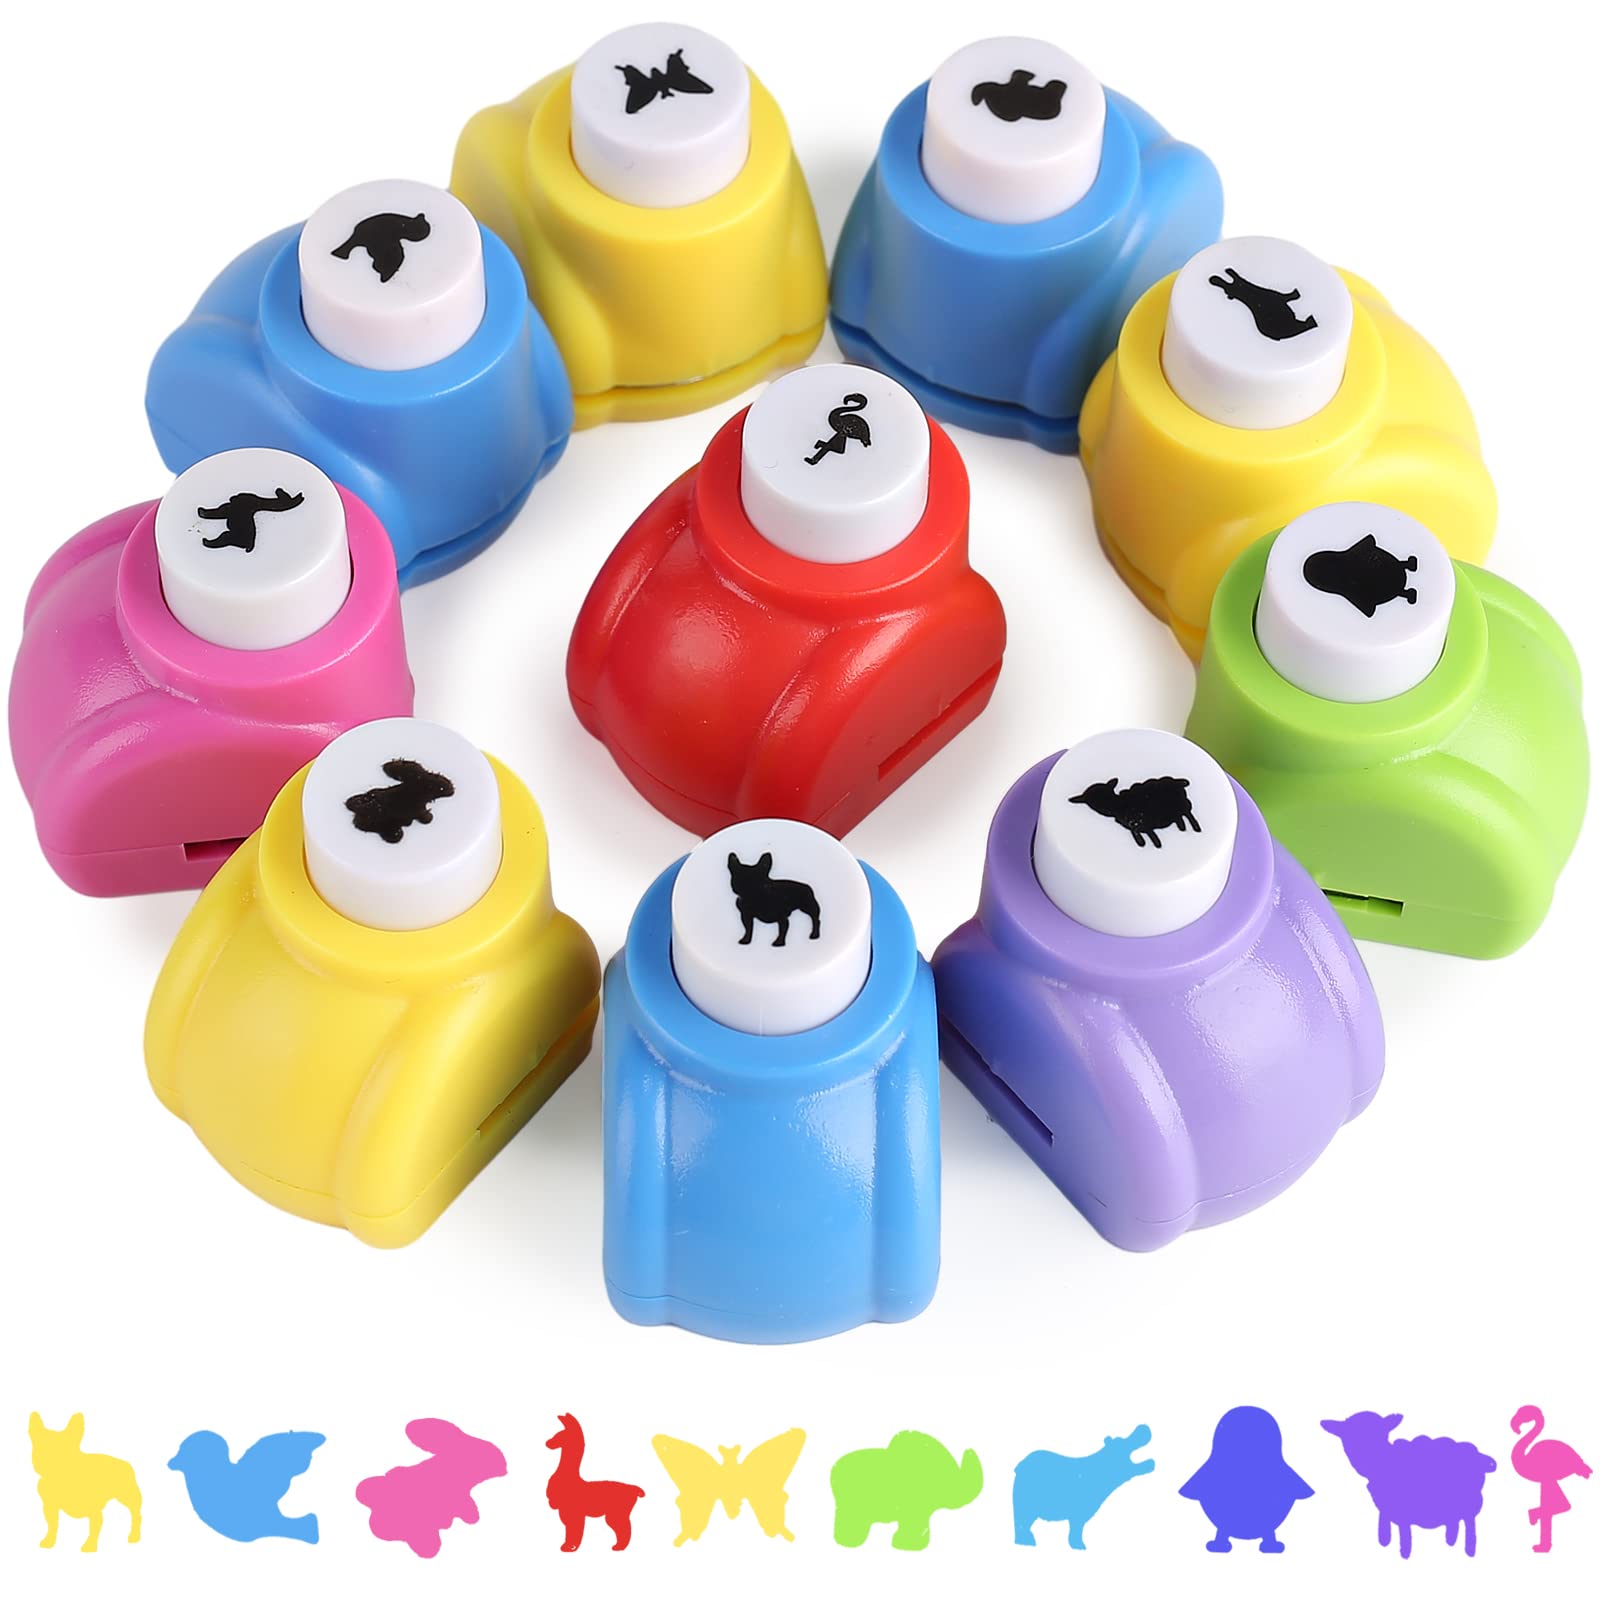 HTG0125 LoveInUSA Animals Hole Punch Set, 10PCS Kids Paper Craft Punches  Decorative Hole Puncher for Crafting Scrapbook Nail Designs